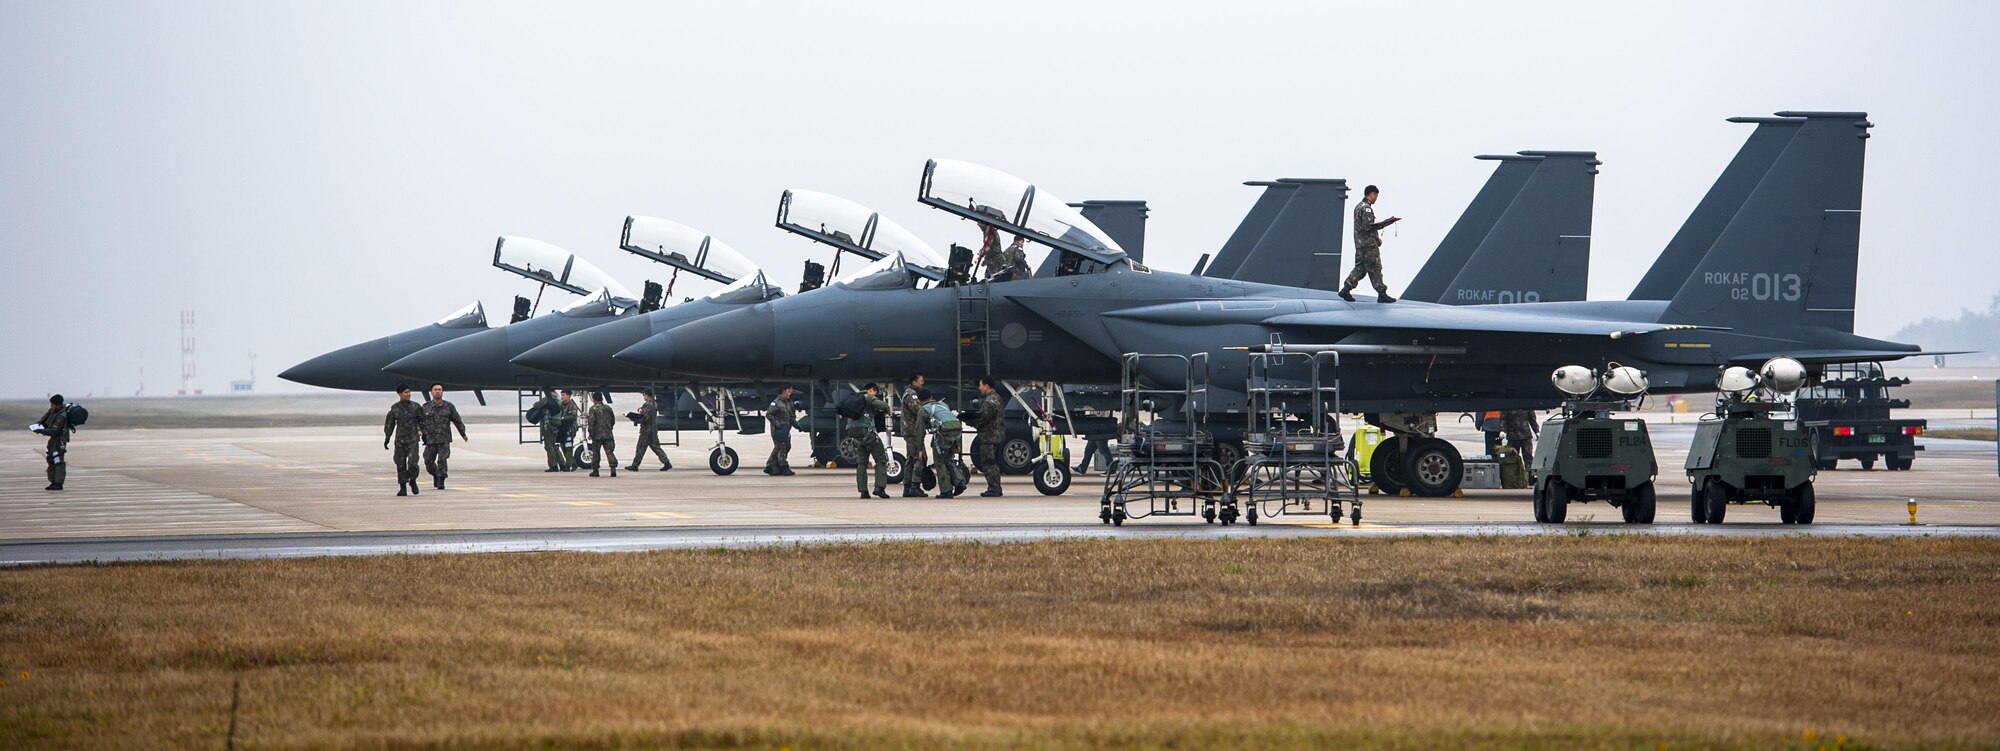 Maintainers from the Republic of Korea air force perform post-flight maintenance on F-15K Slam Eagles from the 11th Fighter Wing, Daegu, during Buddy Wing 15-7 at Kunsan Air Base, Republic of Korea, Nov. 17, 2015. Buddy Wing is part of a combined fighter exchange program designed to improve interoperability between U.S. Air Force and ROKAF fighter squadrons and are conducted multiple times throughout the year in order to promote cultural awareness and sharpen combined combat capabilities. (U.S. Air Force photo by Staff Sgt. Nick Wilson/Released) 